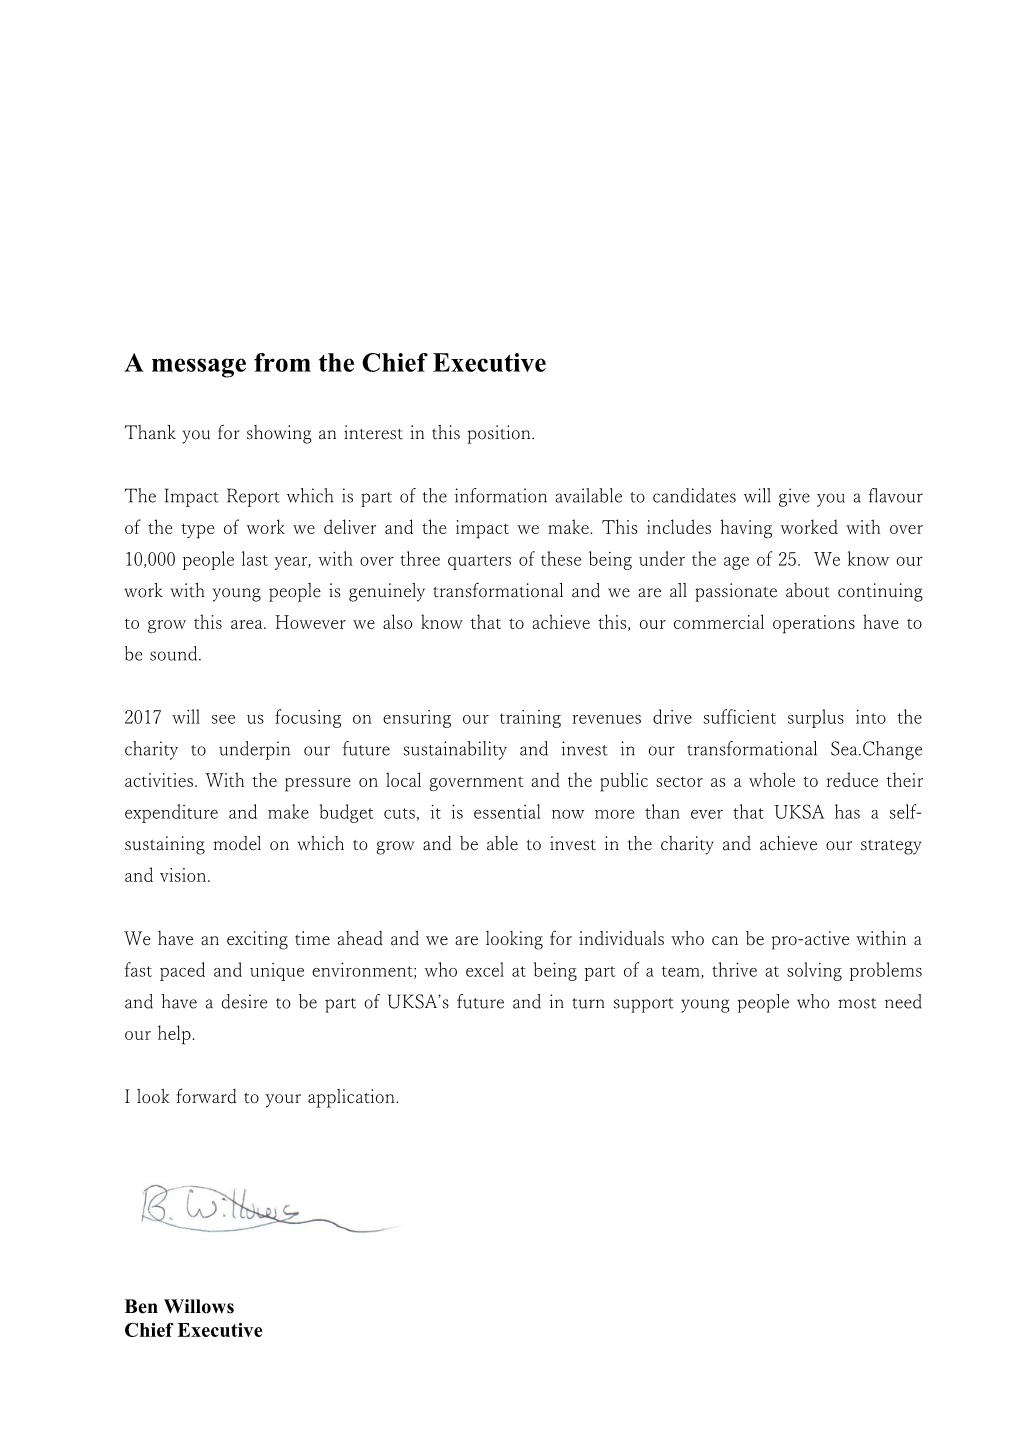 A Message from the Chief Executive